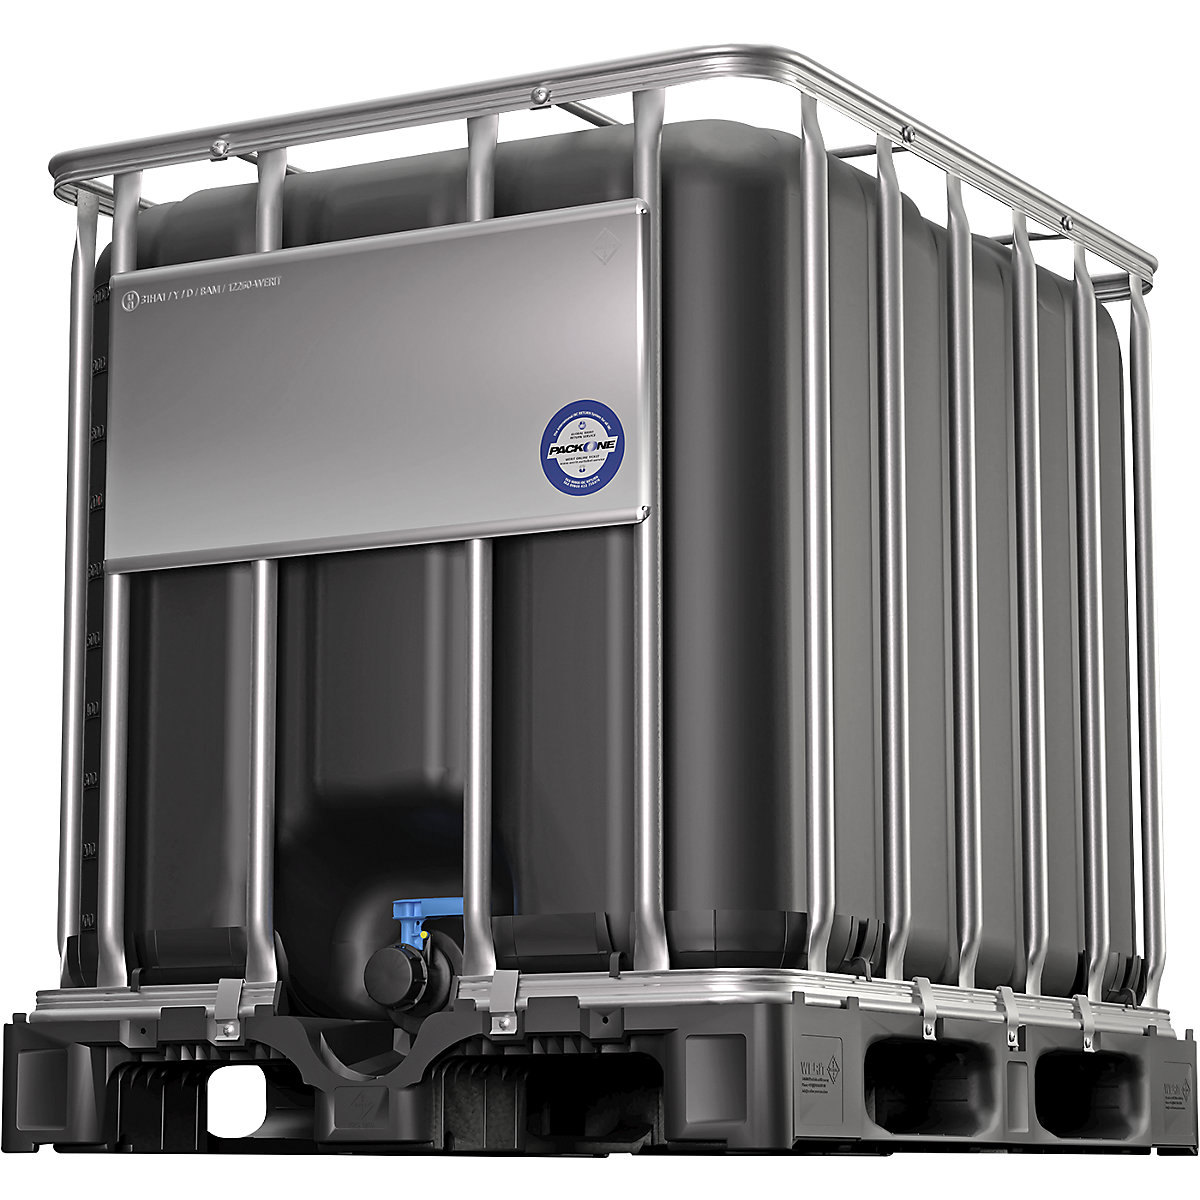 IBC container with UN approval, UV protection